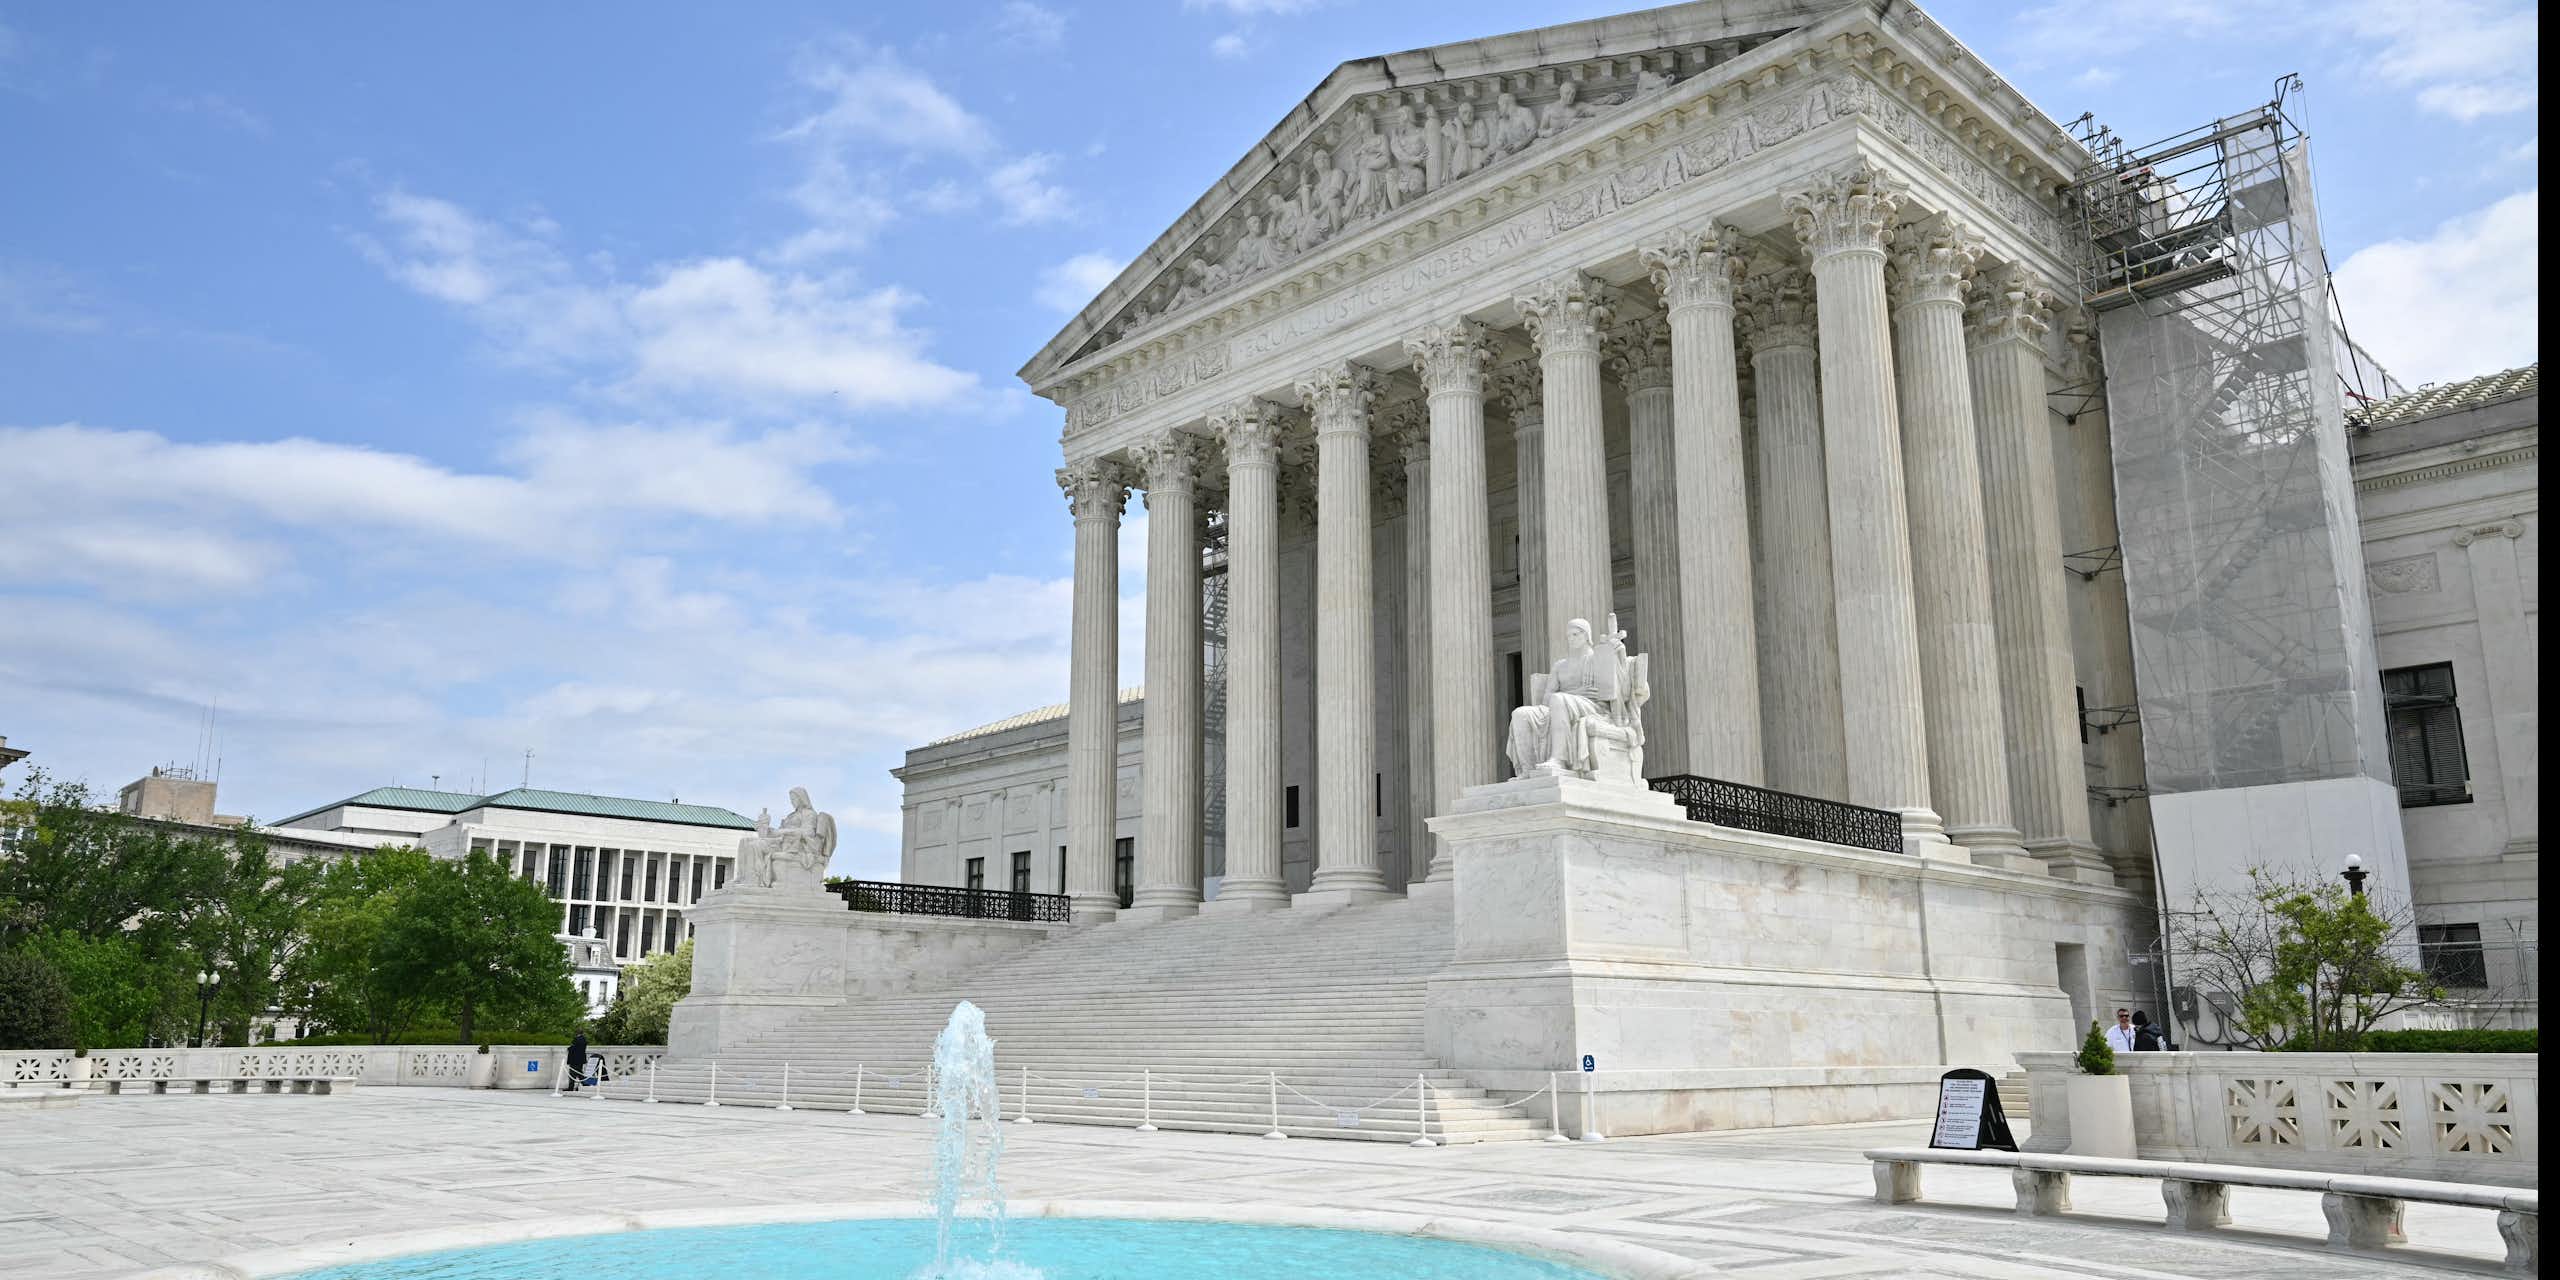 The Supreme Court building with white pillars is seen from an angle, with a small pool and fountain in front of it on a blue-sky day.